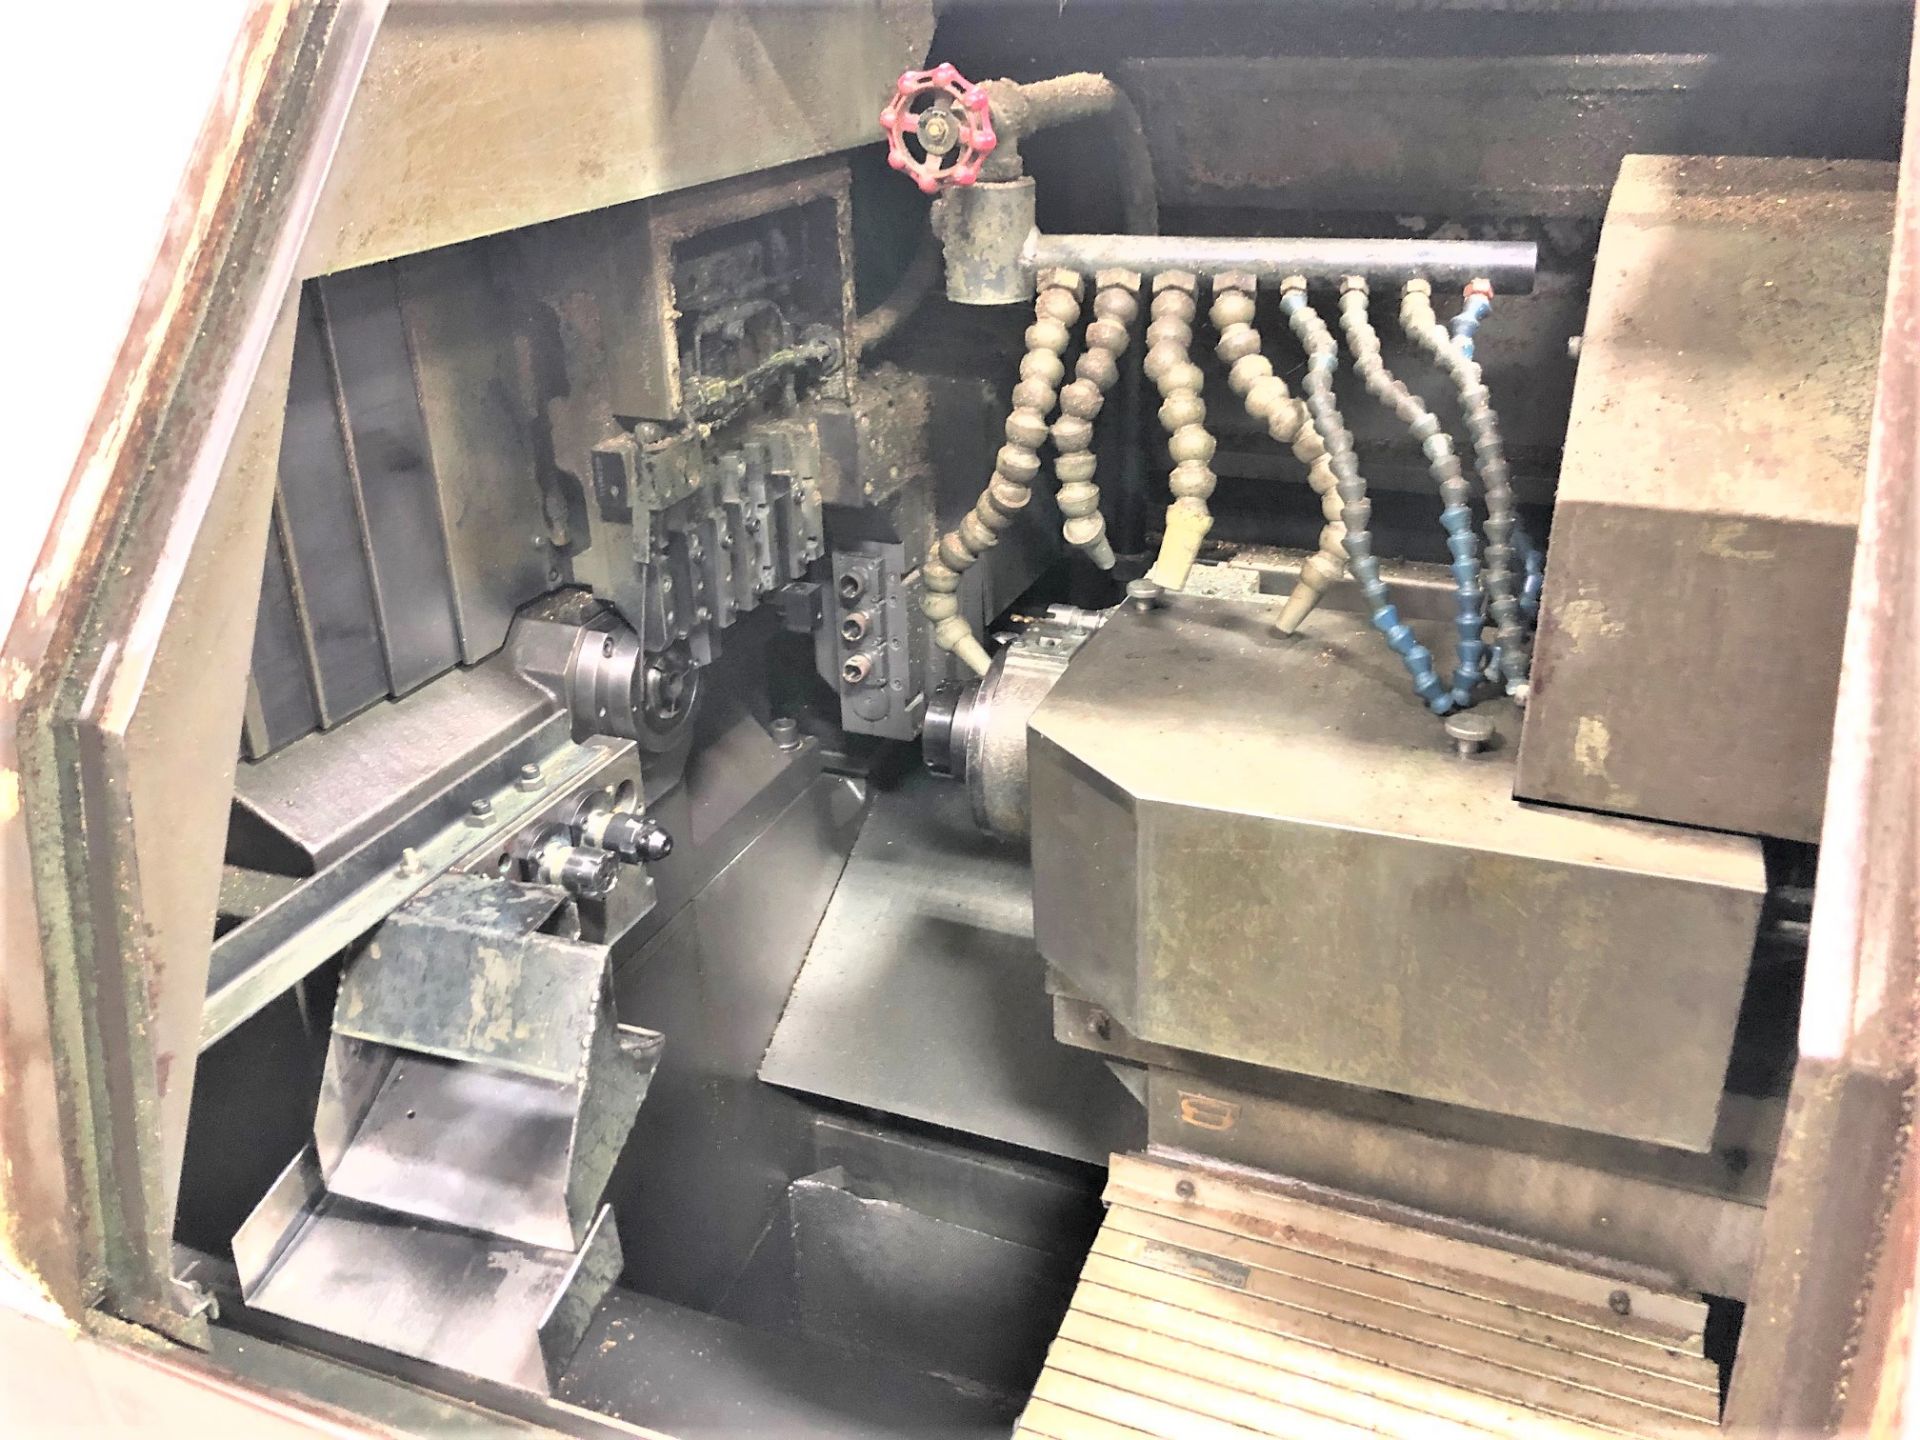 32mm Star SR32 CNC Swiss Type Sliding Headstock Turning Center Automatic Lathe, S/N 031032, New 1999 - Image 3 of 5